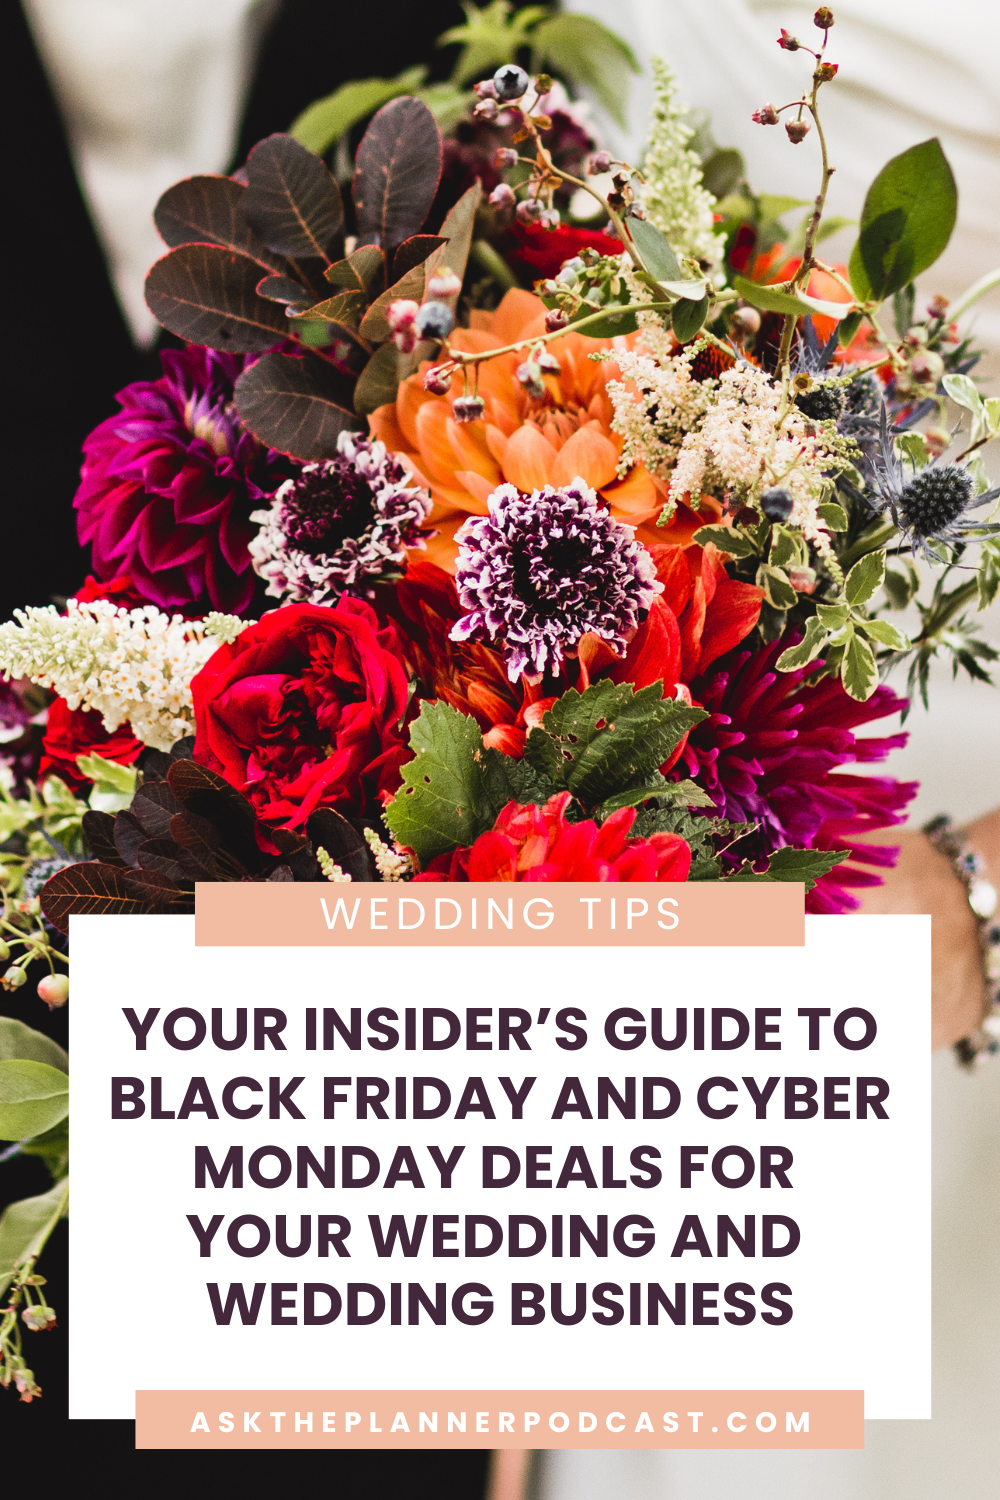 Black Friday and Cyber Monday Deals for Your Wedding and Wedding Business 